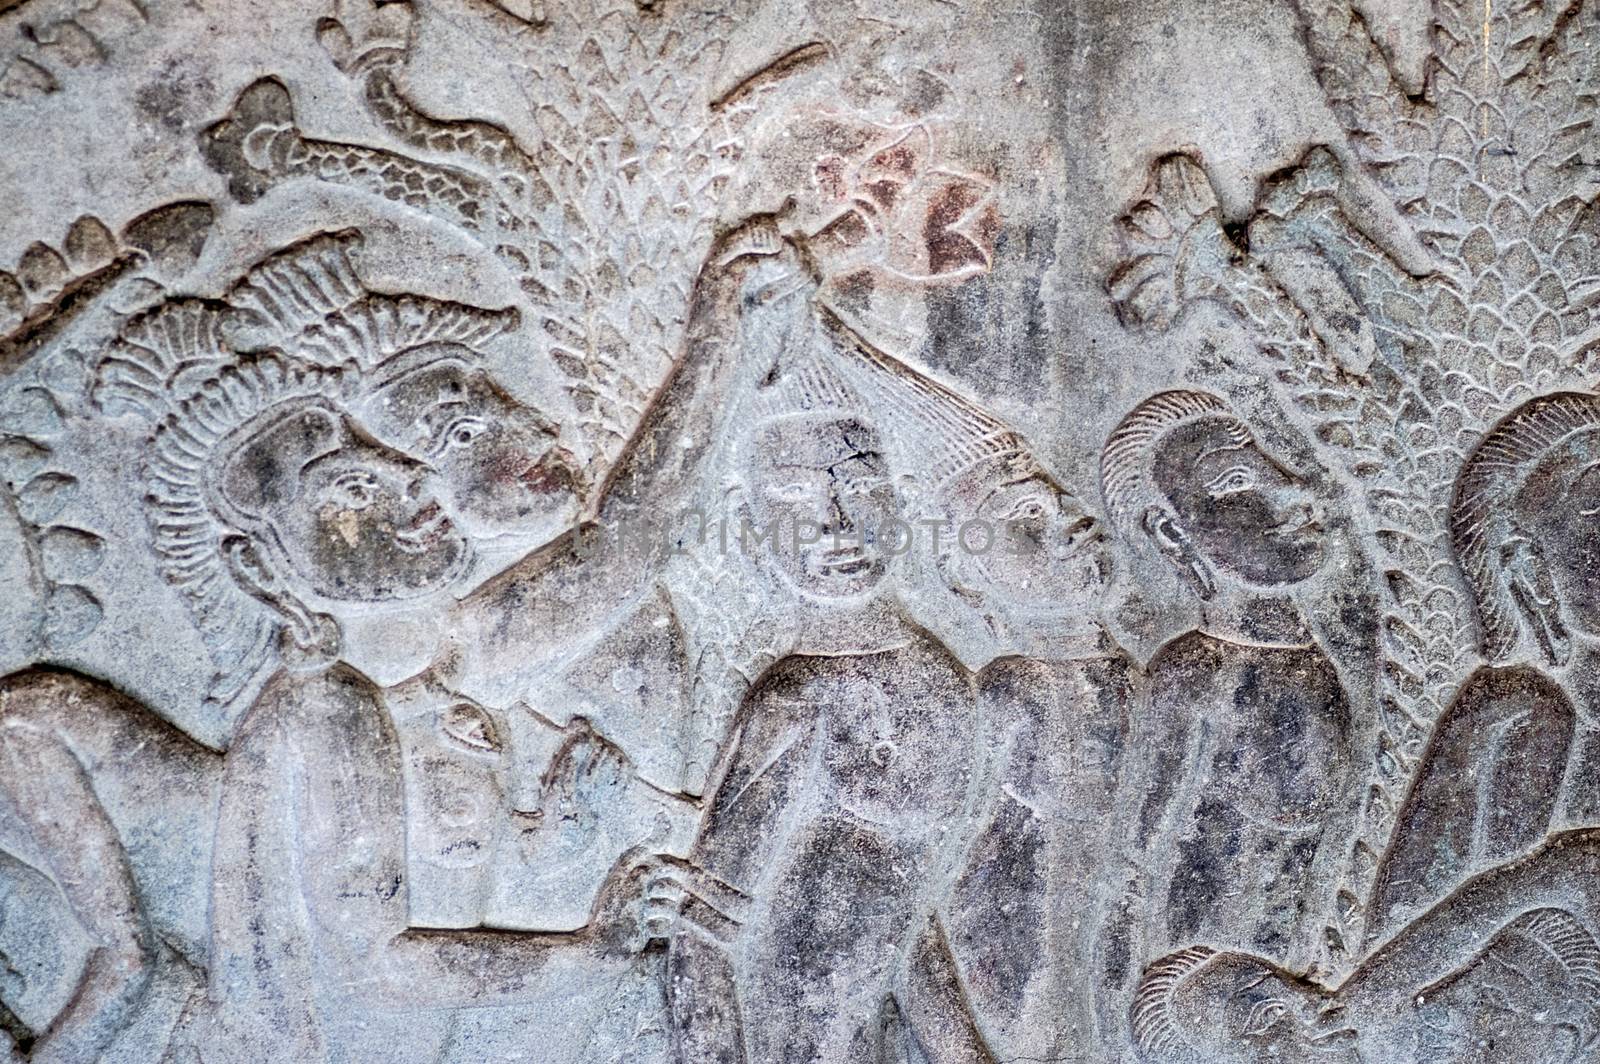 A bas relief carving showing sinners hair being pulled by demons in one of the 32 hells in the Hindu religion. South gallery, east section, Angkor Wat Temple, Siem Reap, Cambodia.